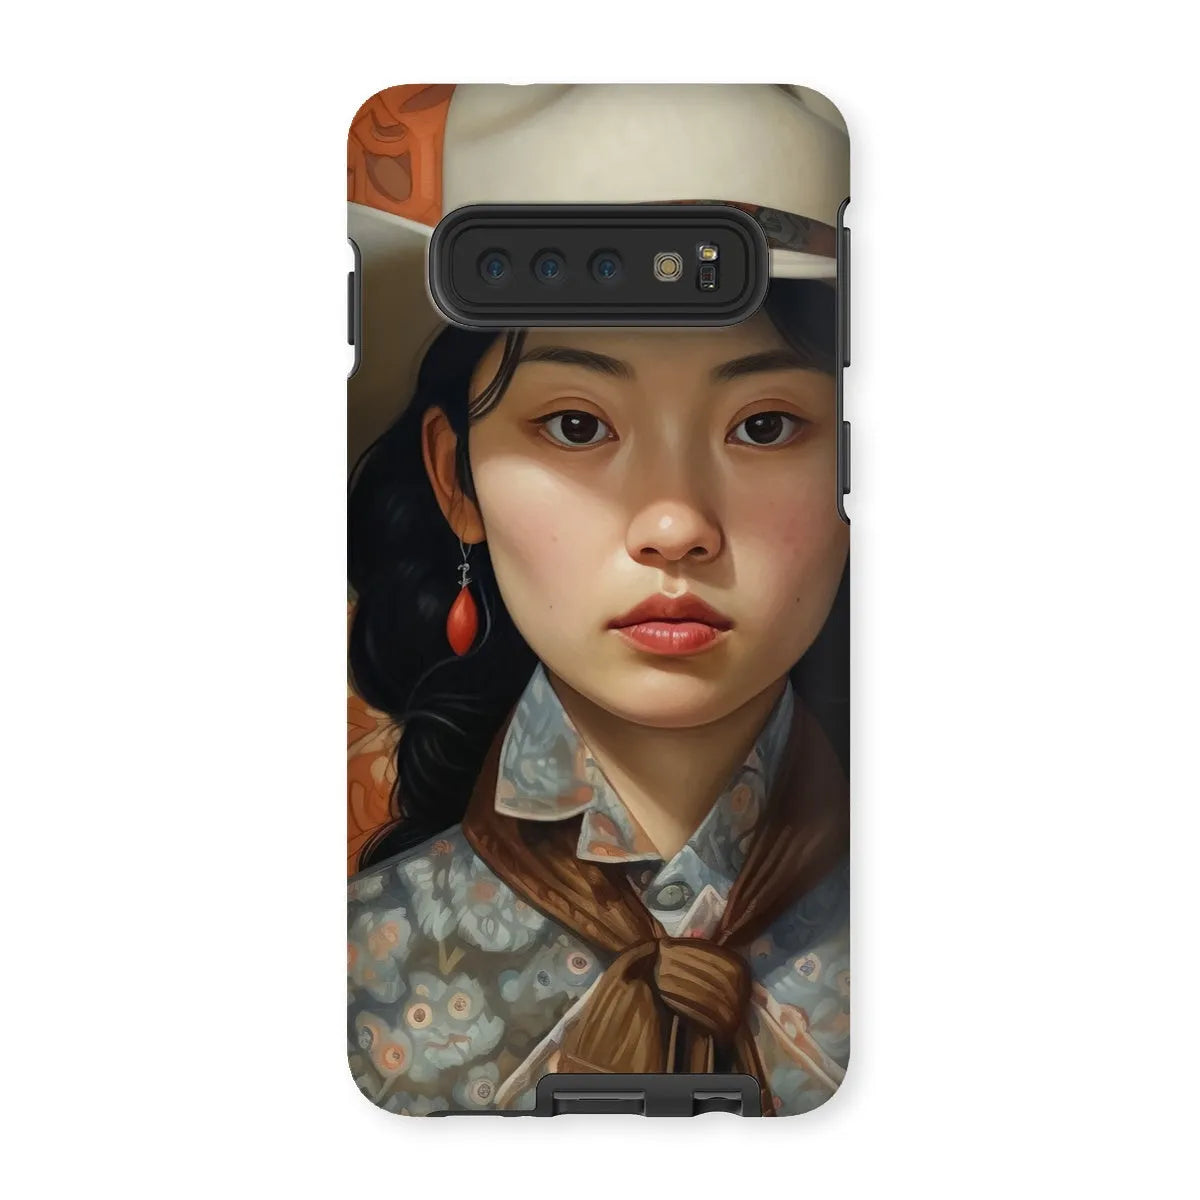 Zhi The Lesbian Cowgirl - Sapphic Art Phone Case - Samsung Galaxy S10 / Matte - Mobile Phone Cases - Aesthetic Art